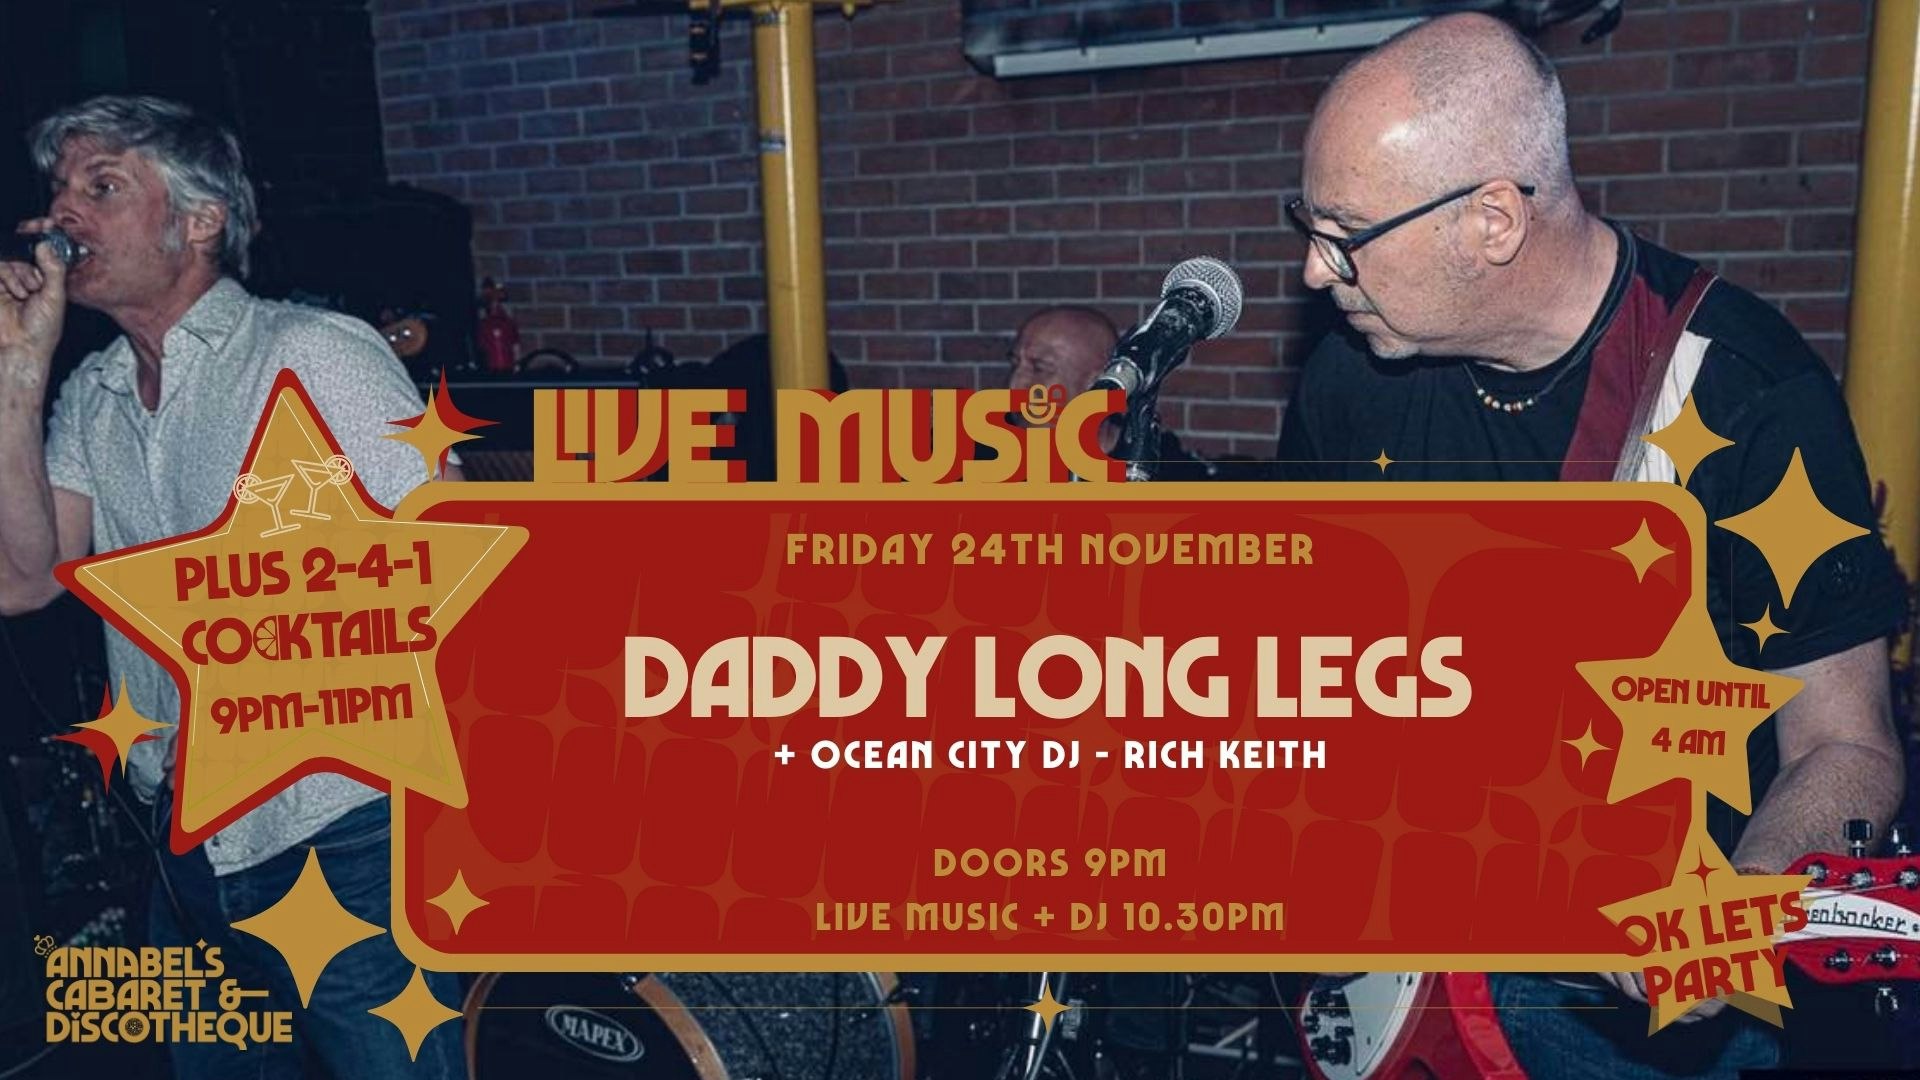 Live Music: DADDY LONG LEGS // Annabel’s Cabaret & Discotheque